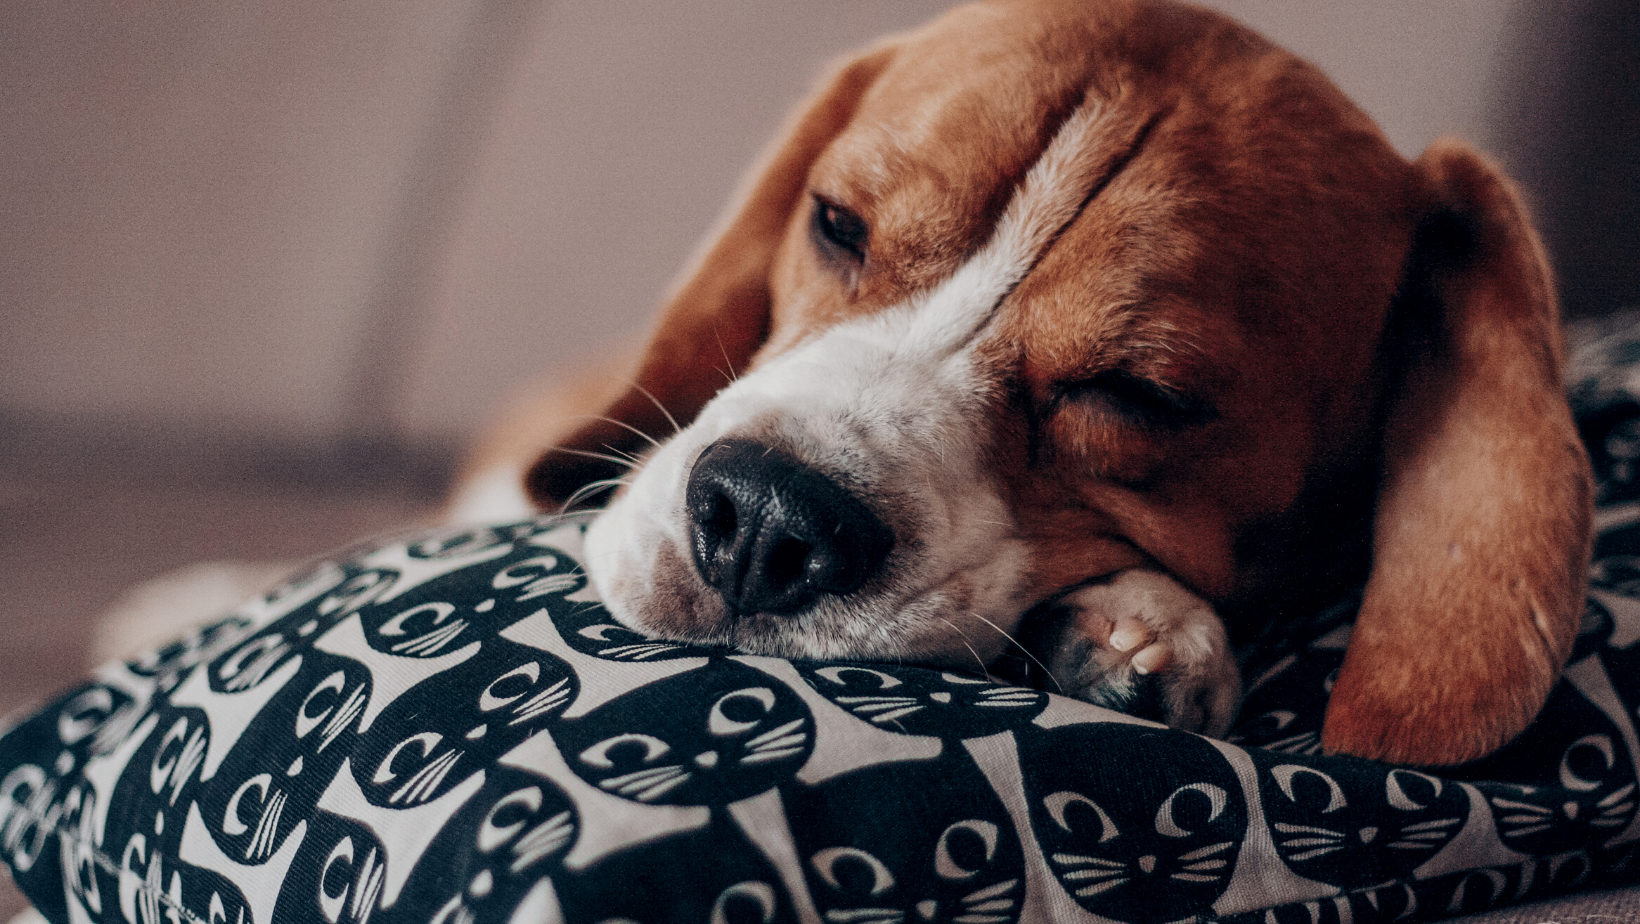 How To Stop Your Dog From The Weird Habit Of Licking The Pillow?